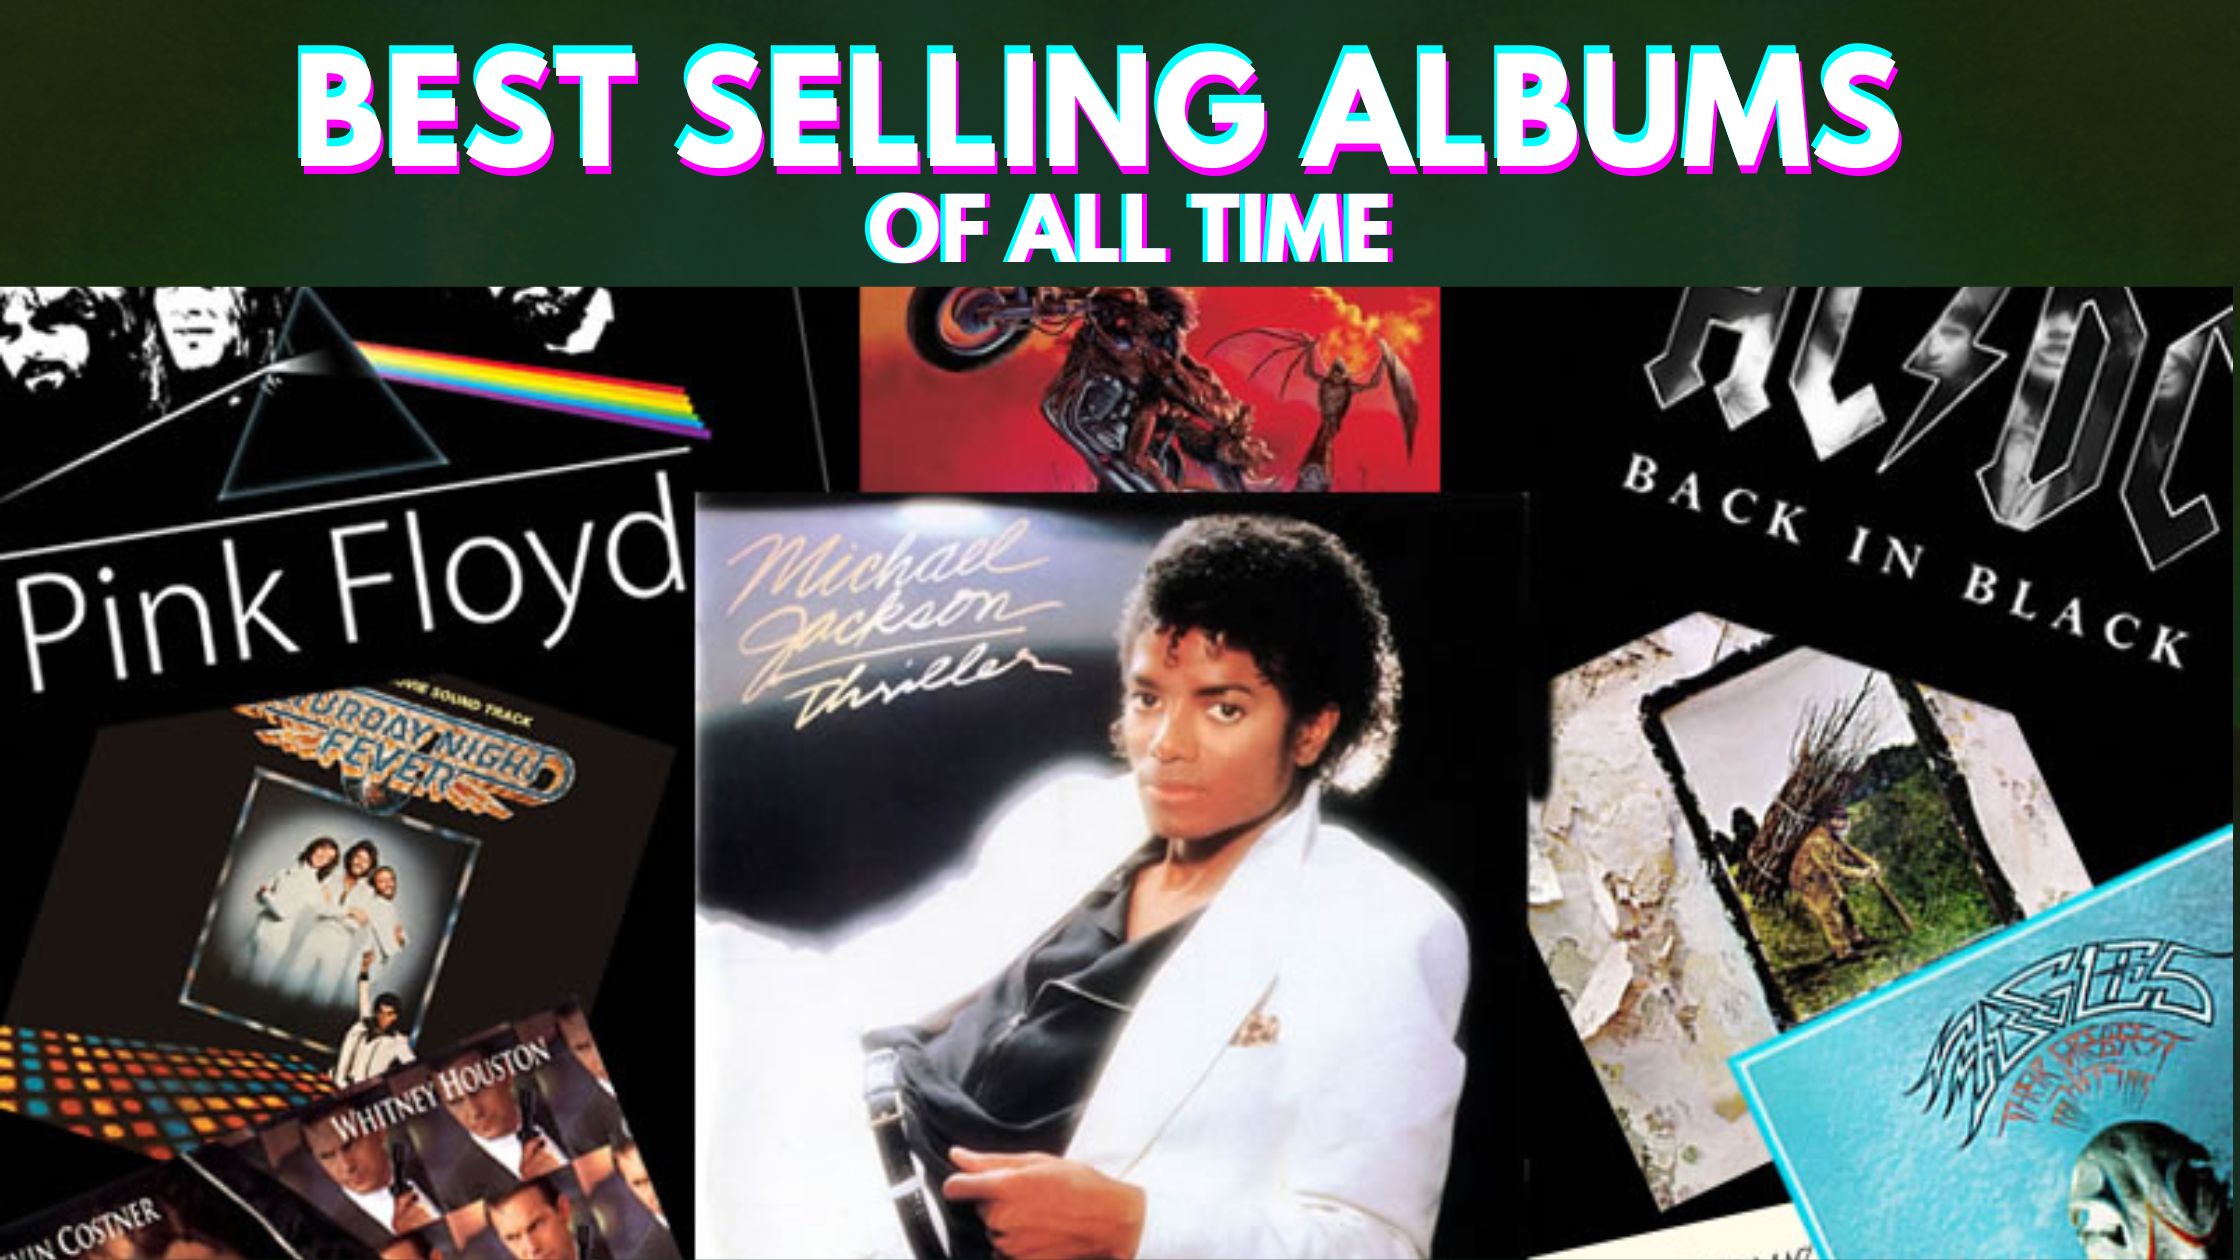 BEST SELLING ALBUMS OF ALL TIME